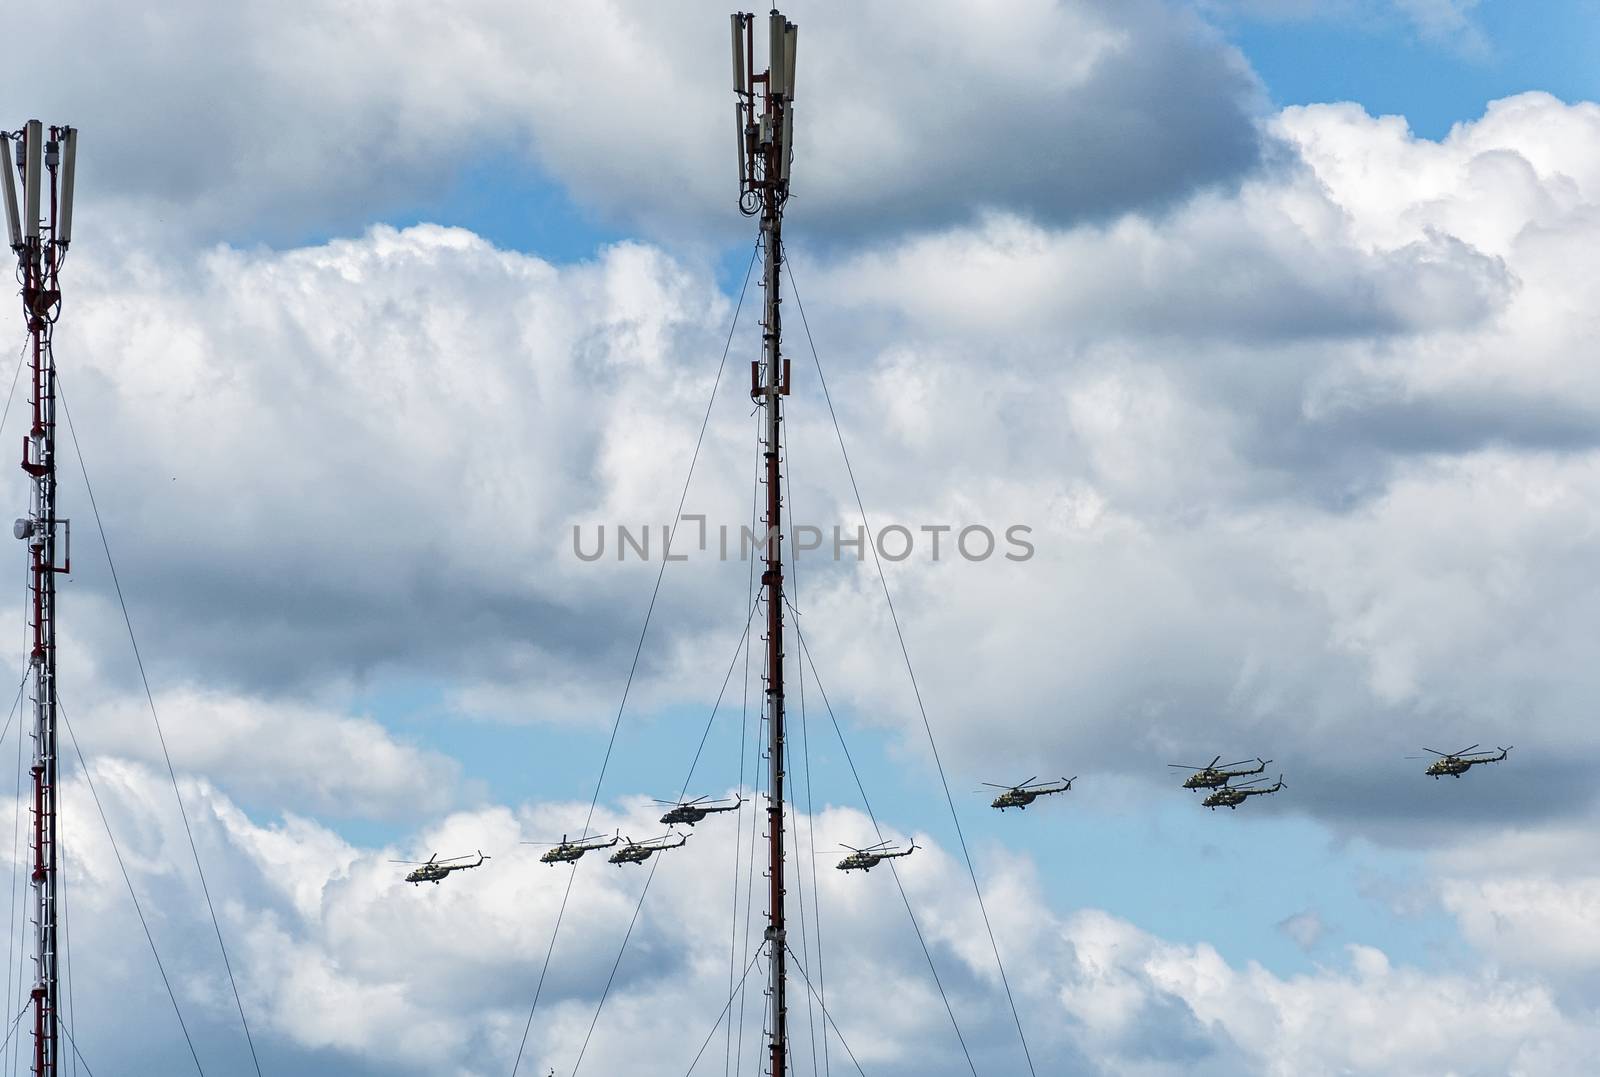 Against the background of a cloudy sky military helicopters fly